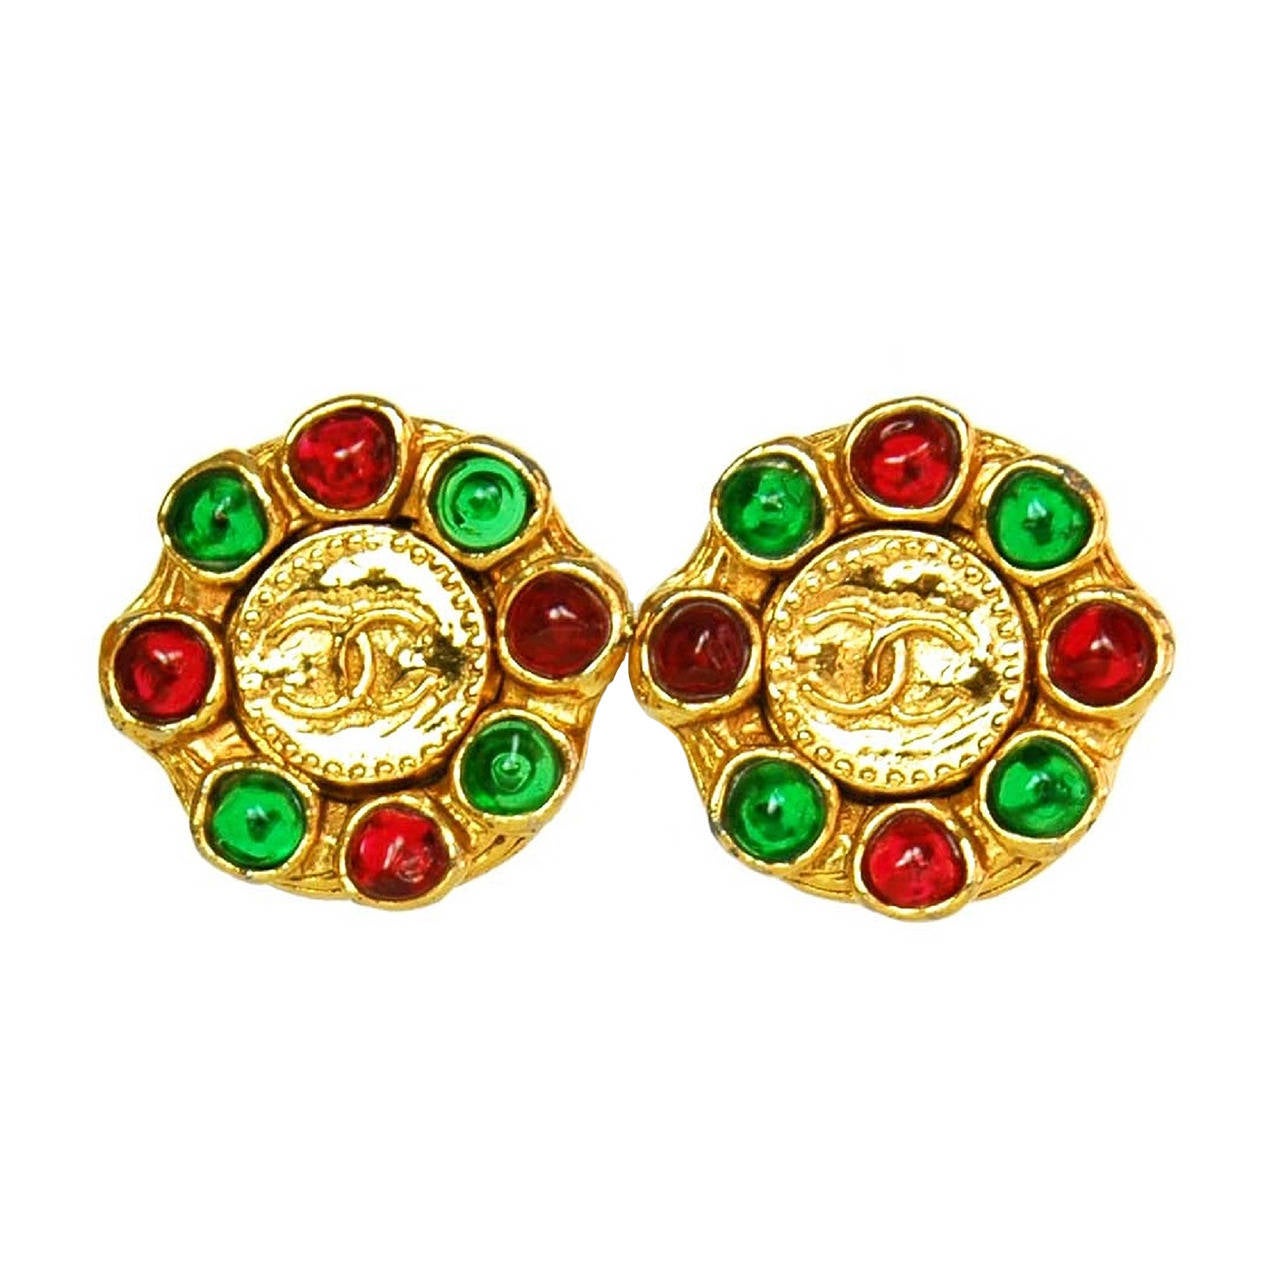 CHANEL Vintage '70s-'80s Gold & Gripoix Clip On Earrings